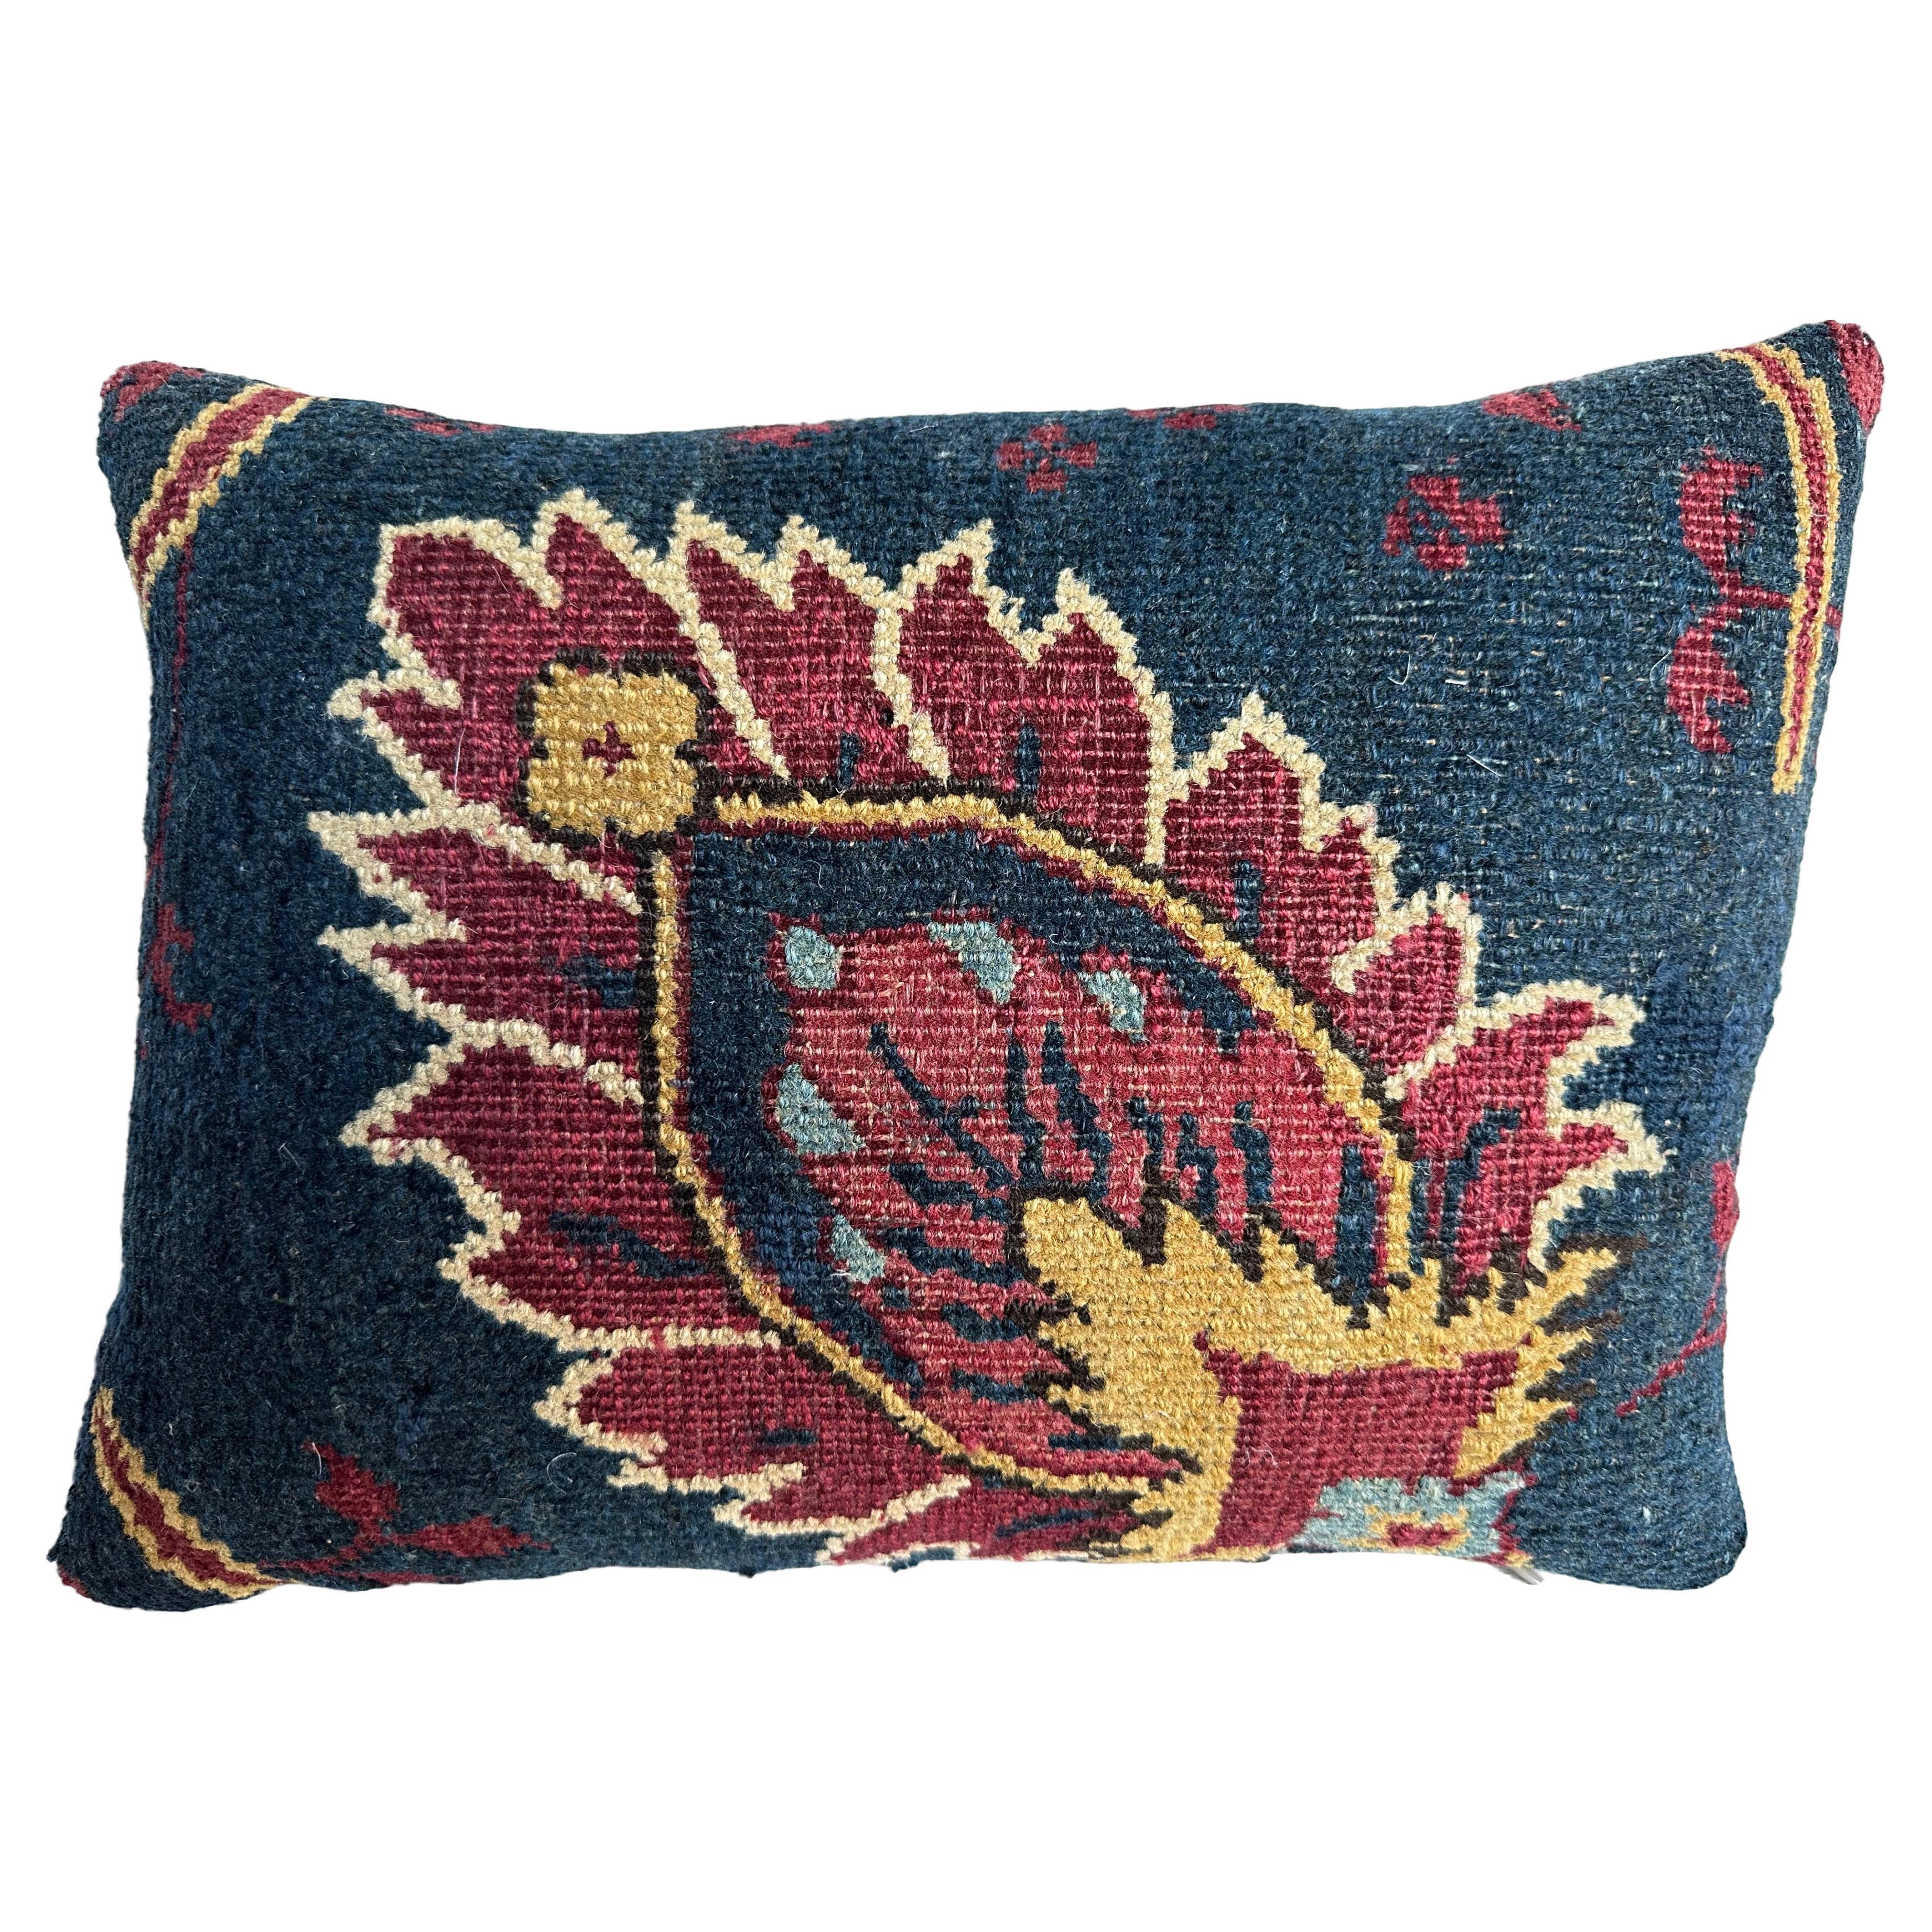 1850 Amritsar Pillow - 16" X 11" For Sale